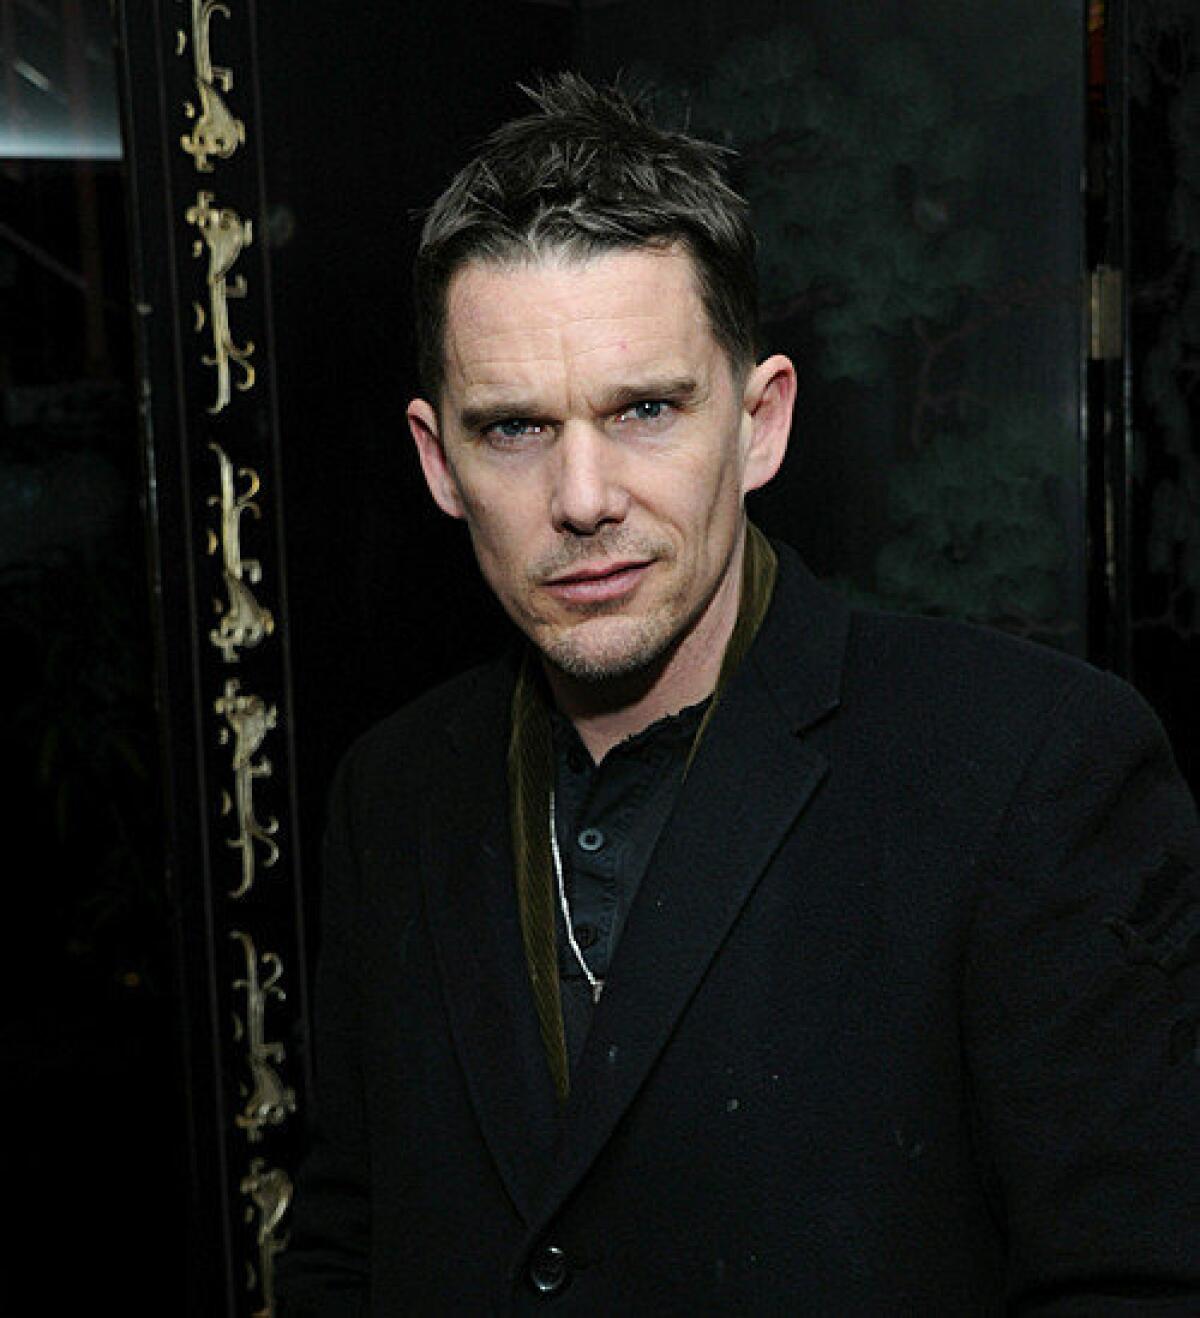 Ethan Hawke will star in "Macbeth" at Lincoln Center Theater this winter.